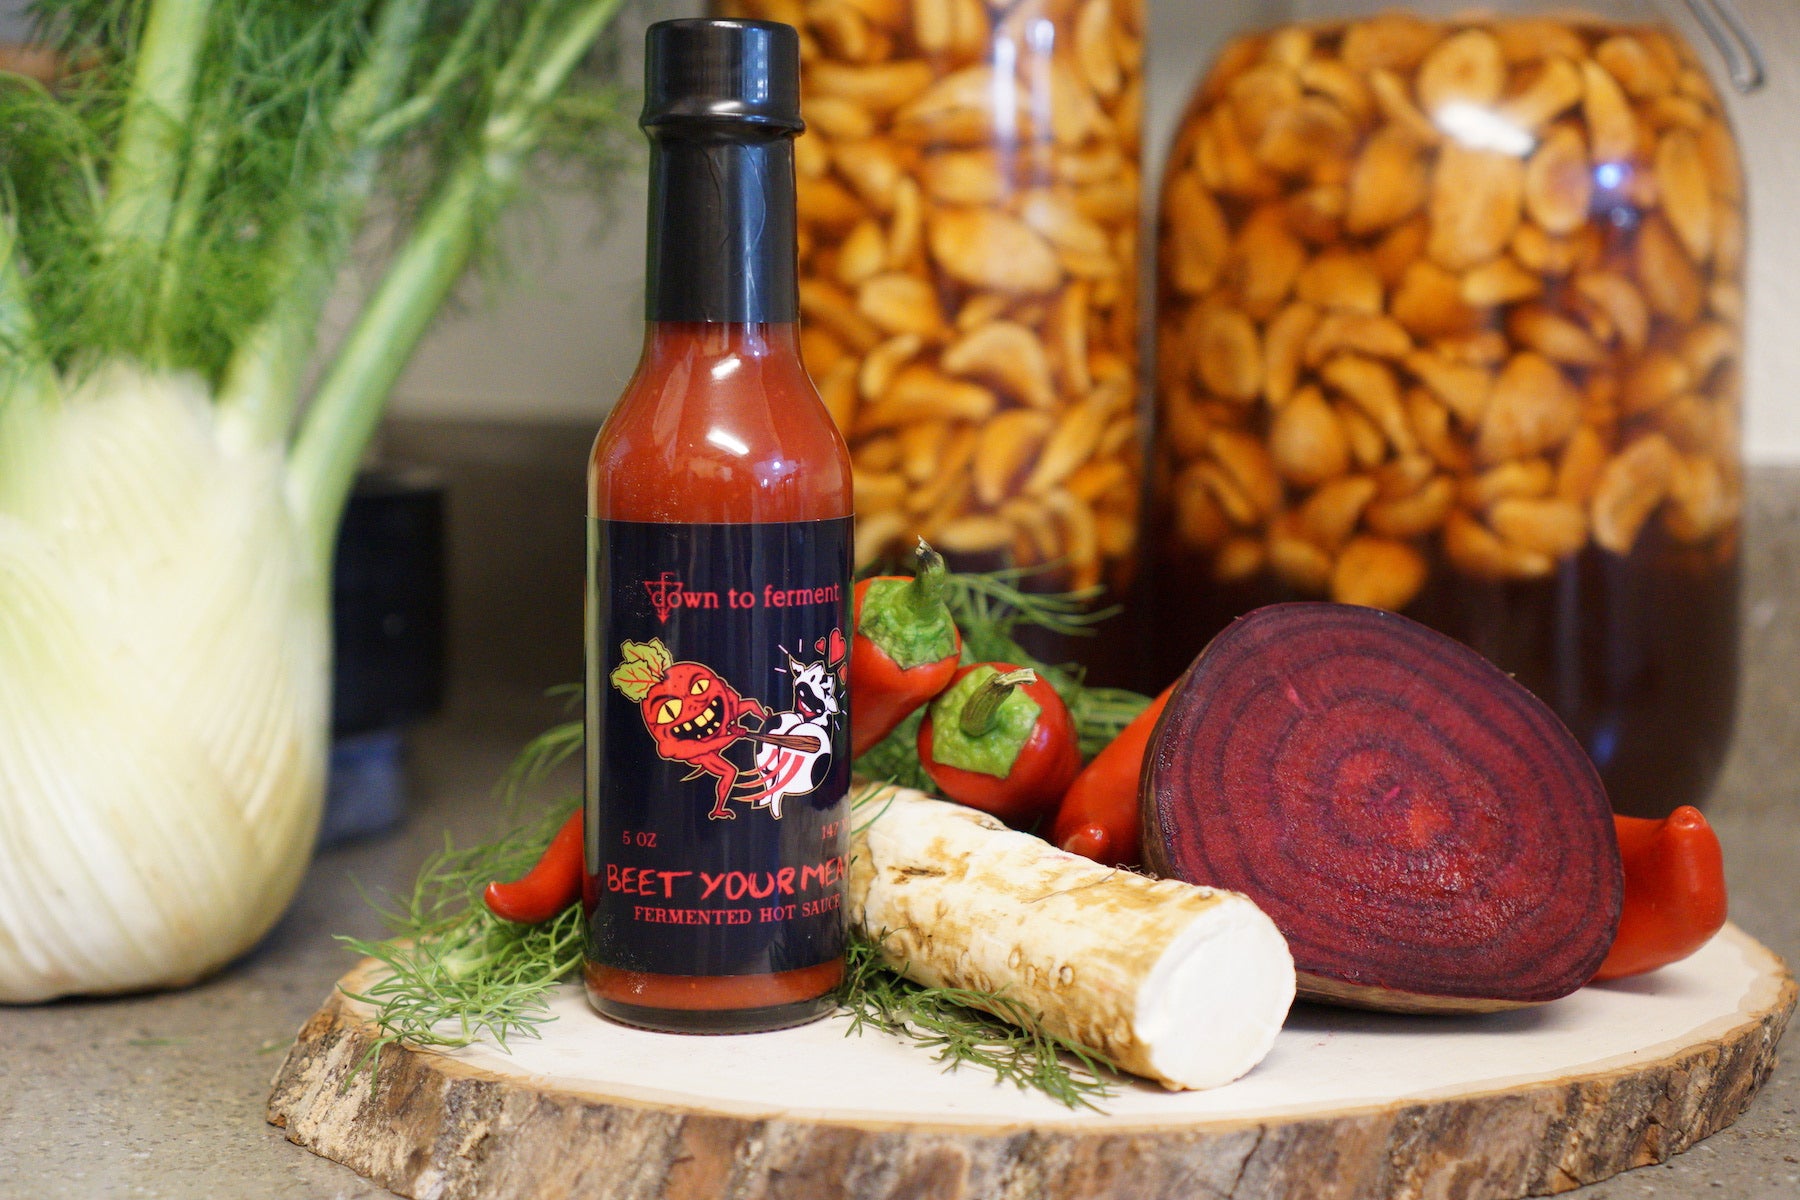 Beet Your Meat: New Hot Sauce Release